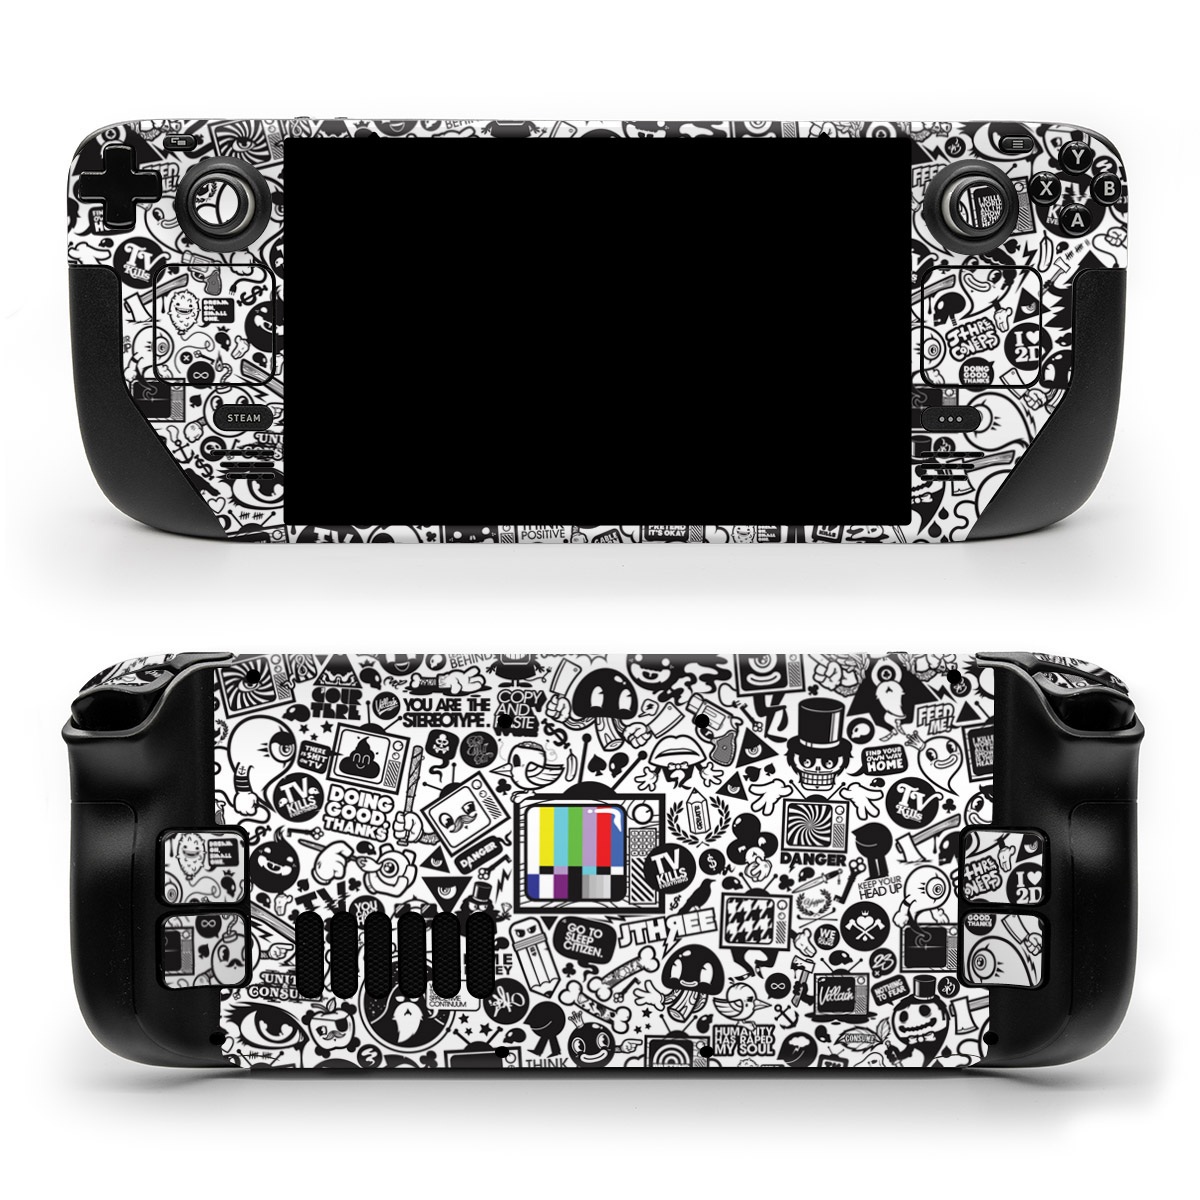 Valve Steam Deck Skin design of Pattern, Drawing, Doodle, Design, Visual arts, Font, Black-and-white, Monochrome, Illustration, Art, with gray, black, white colors